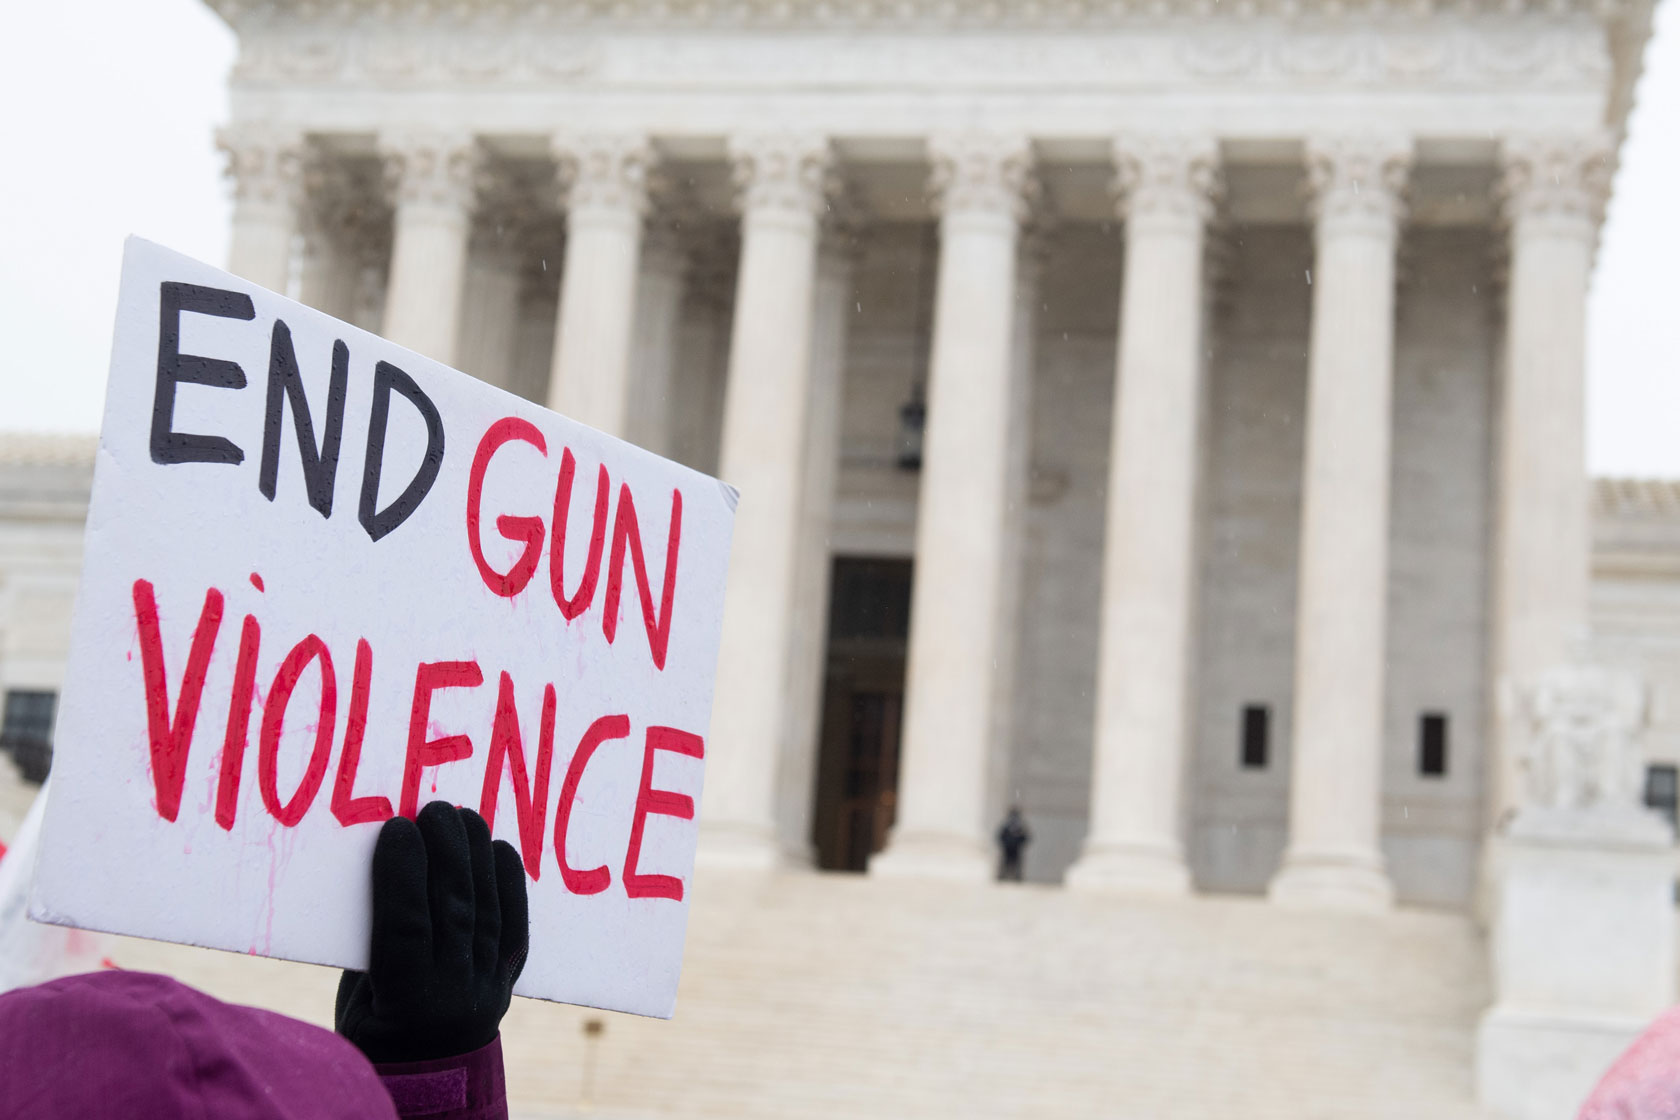 Supporters of gun control and firearm safety measures hold a protest rally outside the U.S. Supreme Court in Washington, D.C. One supporter holds a sign that reads 